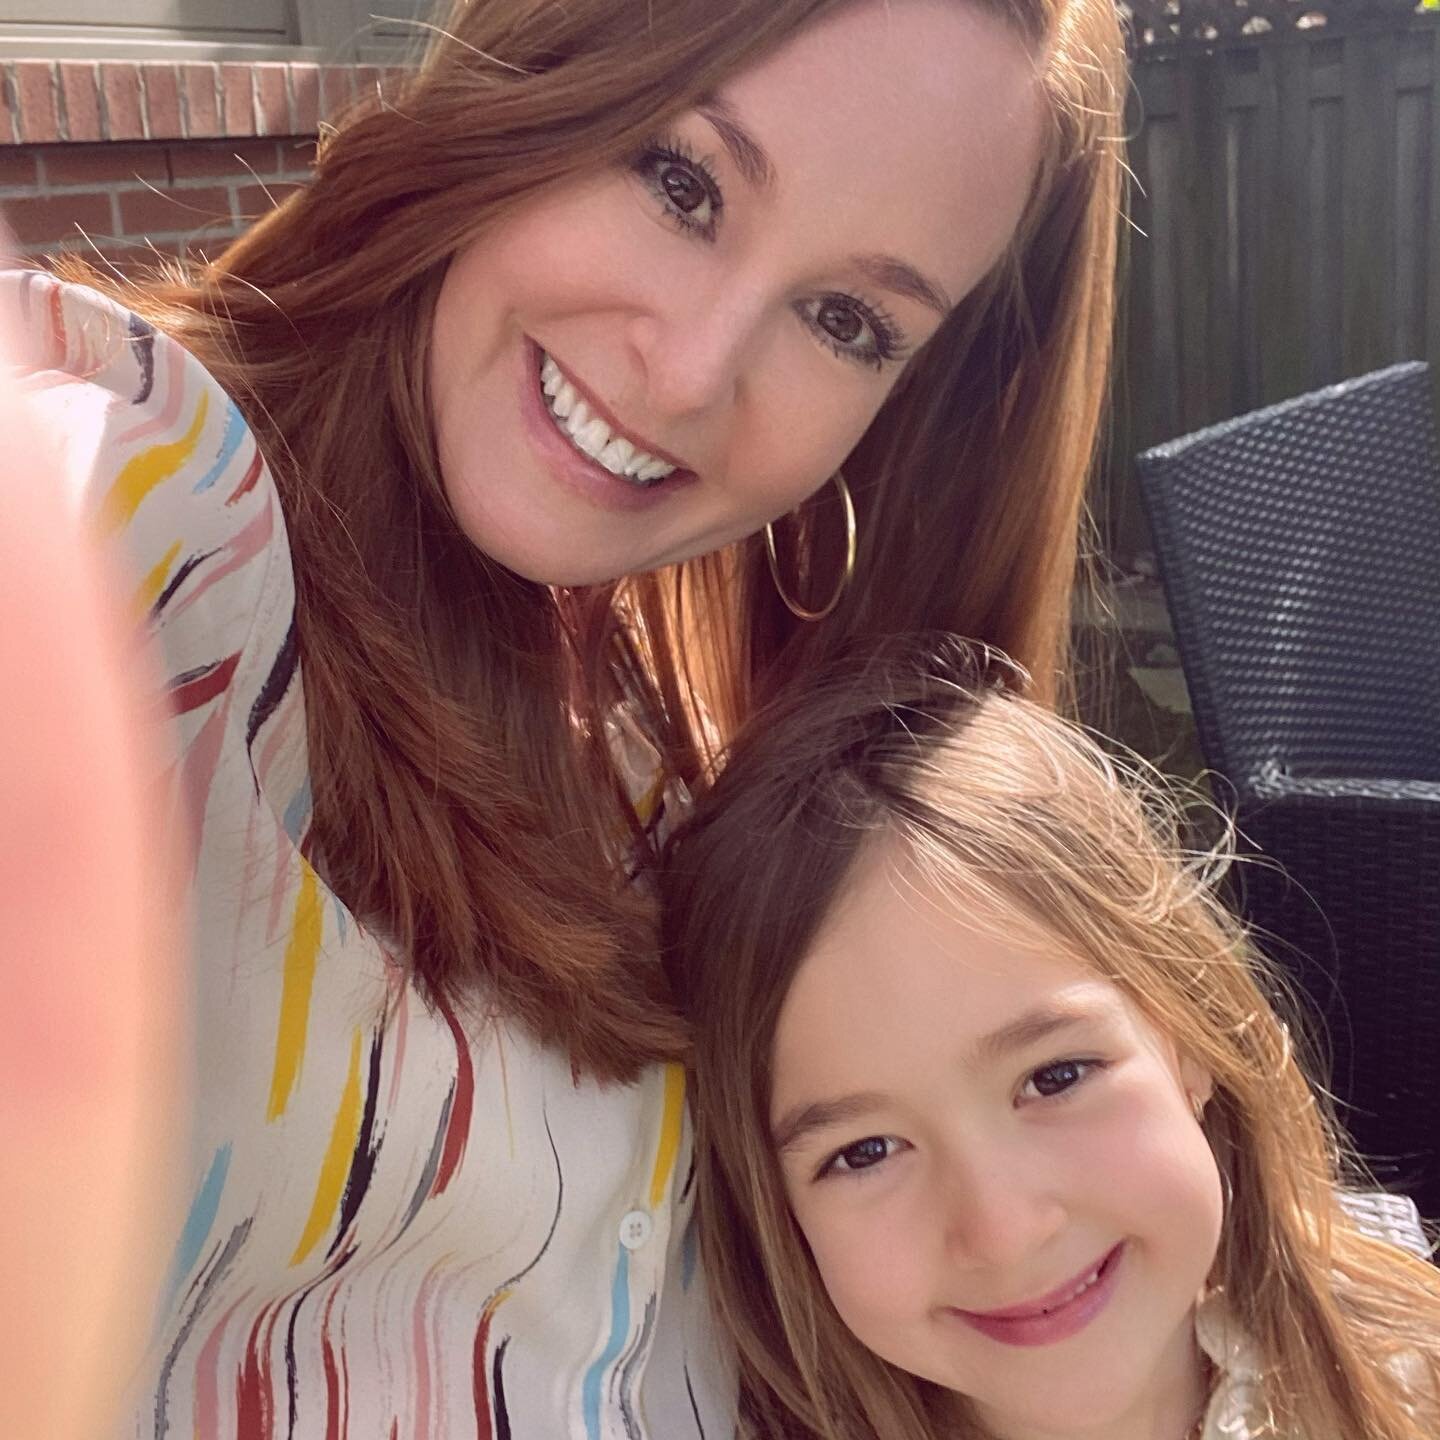 Happy Hump Day #nakedtruthfam 
It&rsquo;s a little gloomy out right now 🌫 so here&rsquo;s a throwback of little A 🌈and myself 👯&zwj;♀️enjoying the sun ☀️ to brighten your day 💖
.
.
.
.
.
.
#twinning #twins #likemotherlikedaughter #skinenergetics 